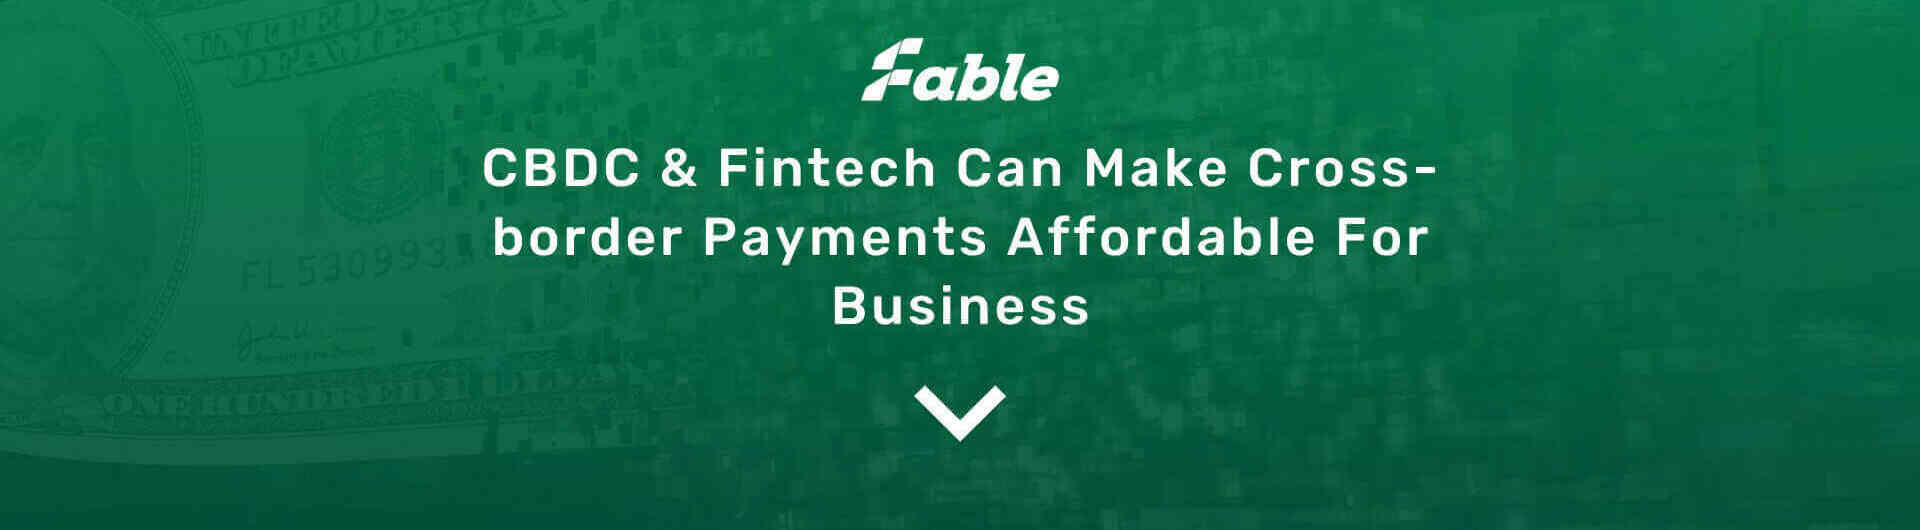 CBDC & Fintech Can Make Cross-border Payments Affordable For Business